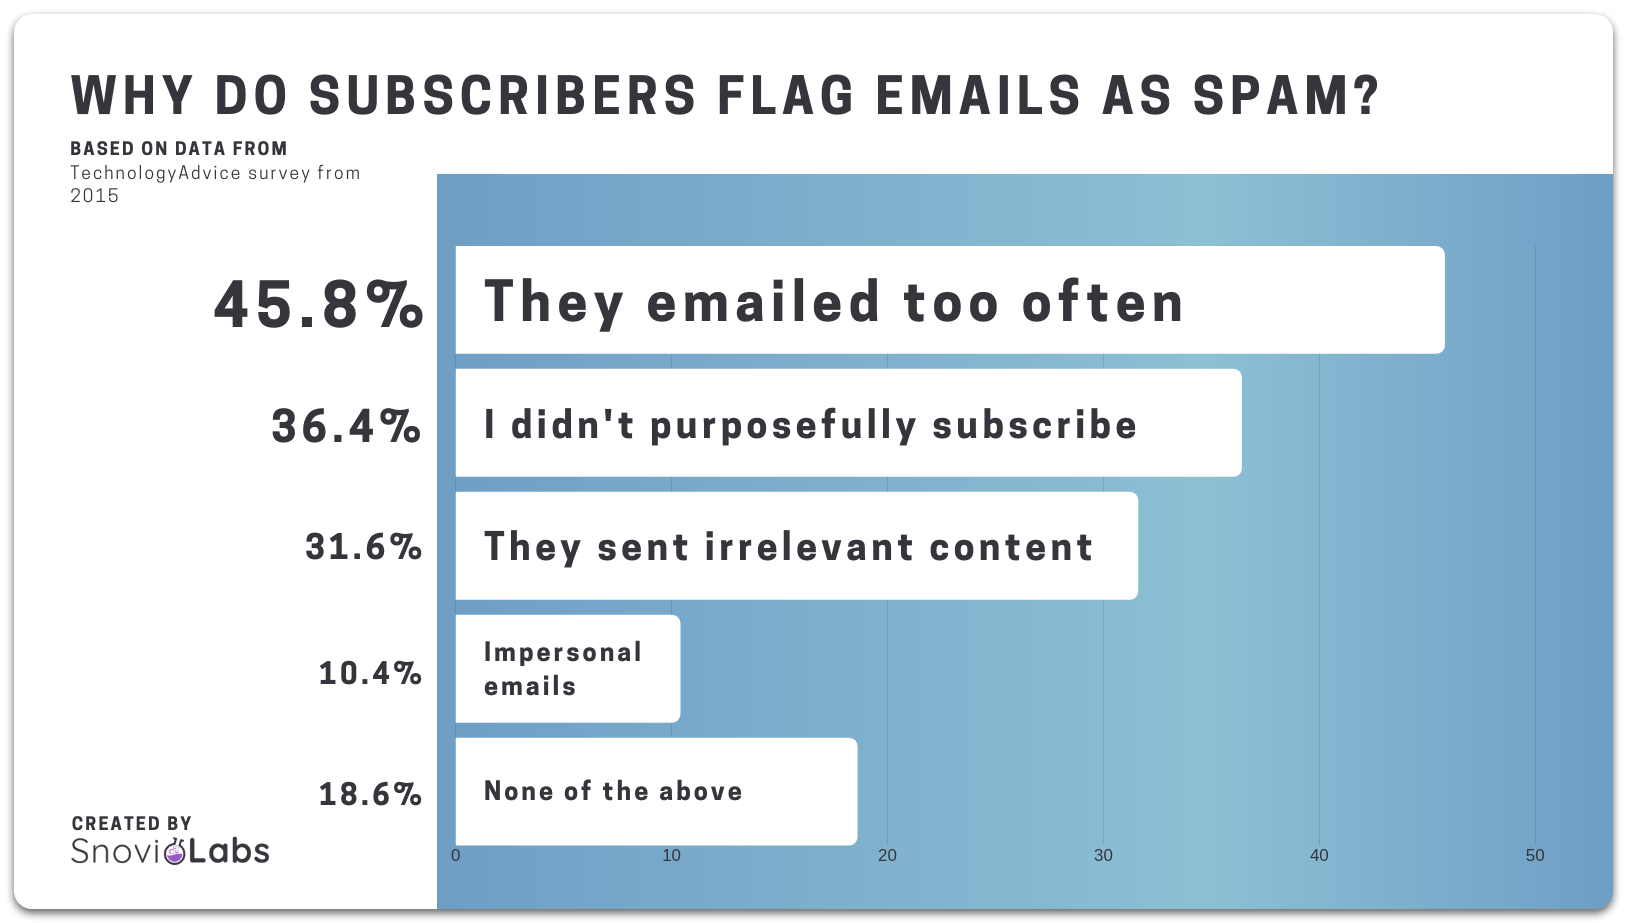 Why flag emails as spam